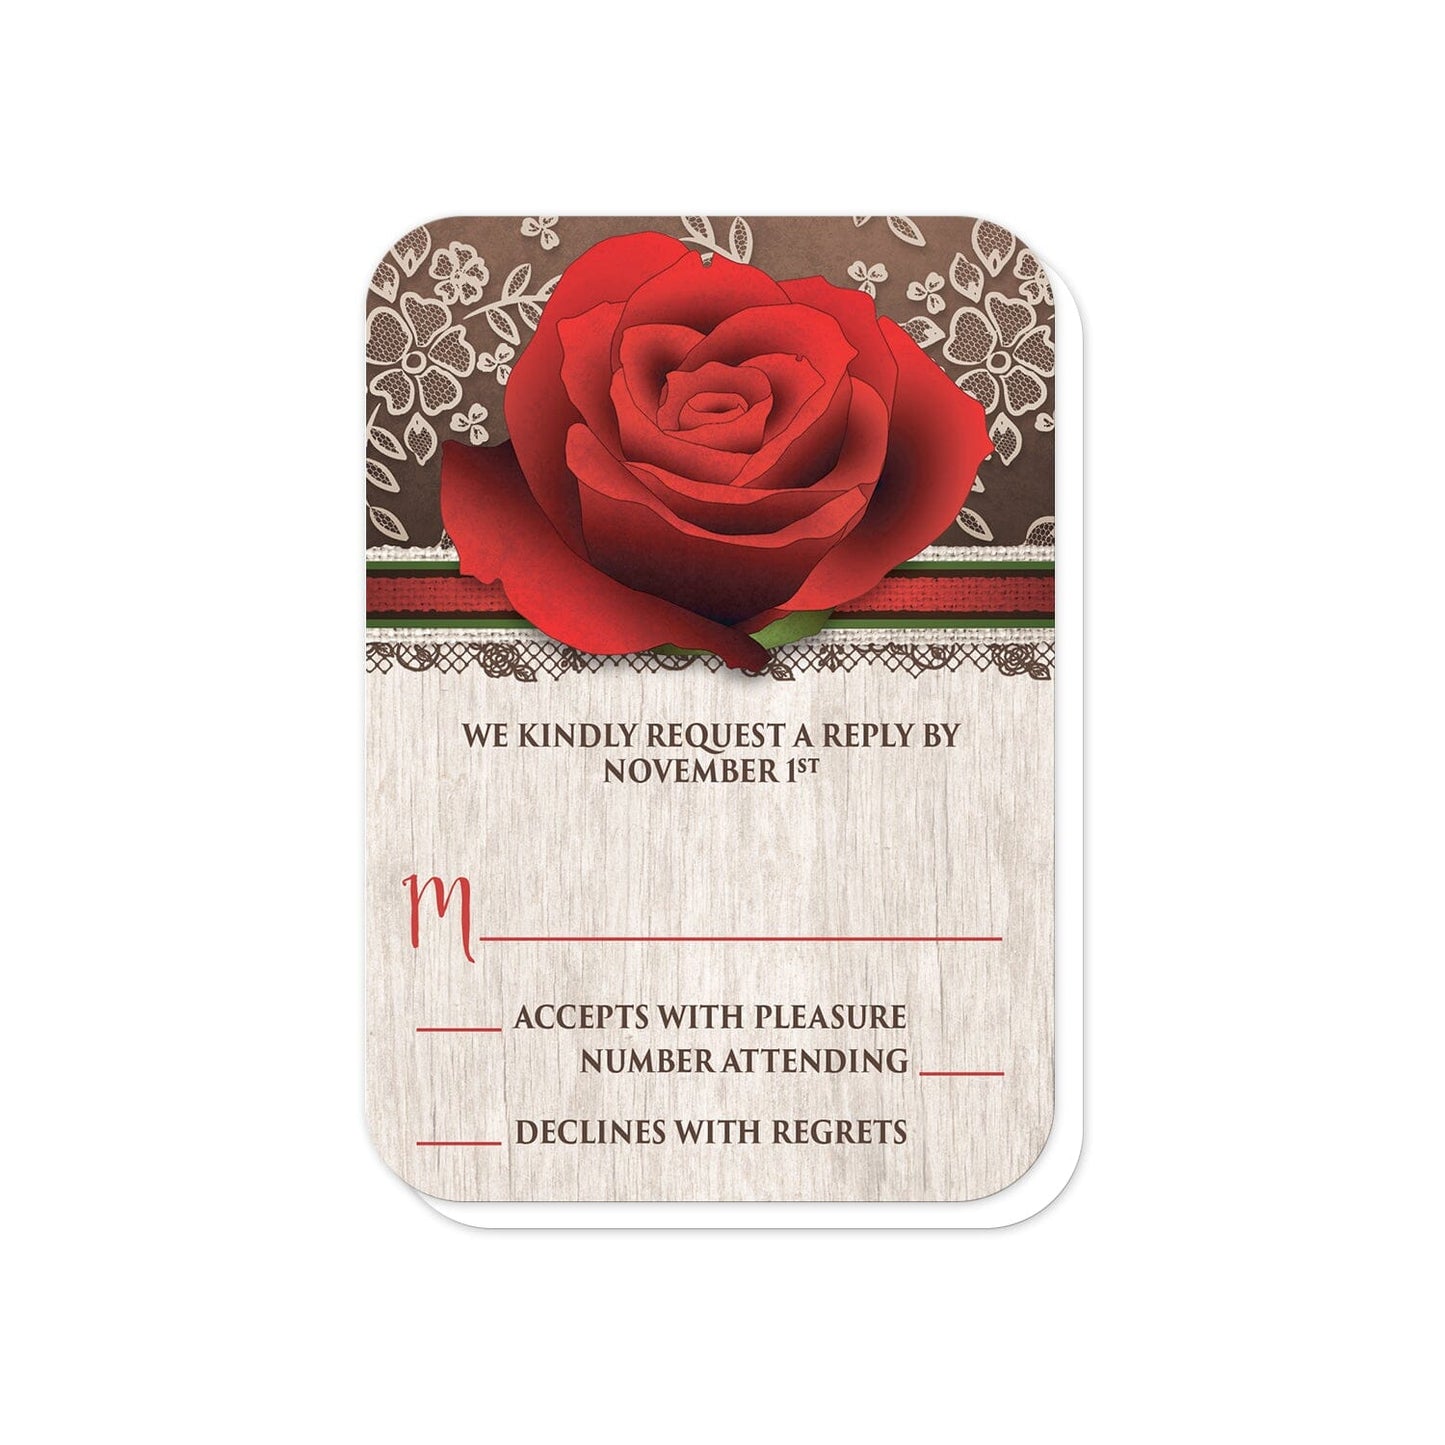 Rustic Wood Lace Red Rose RSVP Cards (with rounded corners) at Artistically Invited. Beautiful rustic wood lace red rose wedding invitations with a lovely large red rose illustration over a rich brown background with a cream lace design at the top of the invitations. Your personalized RSVP date details are custom printed in red and brown over a light wood pattern background below the red rose.